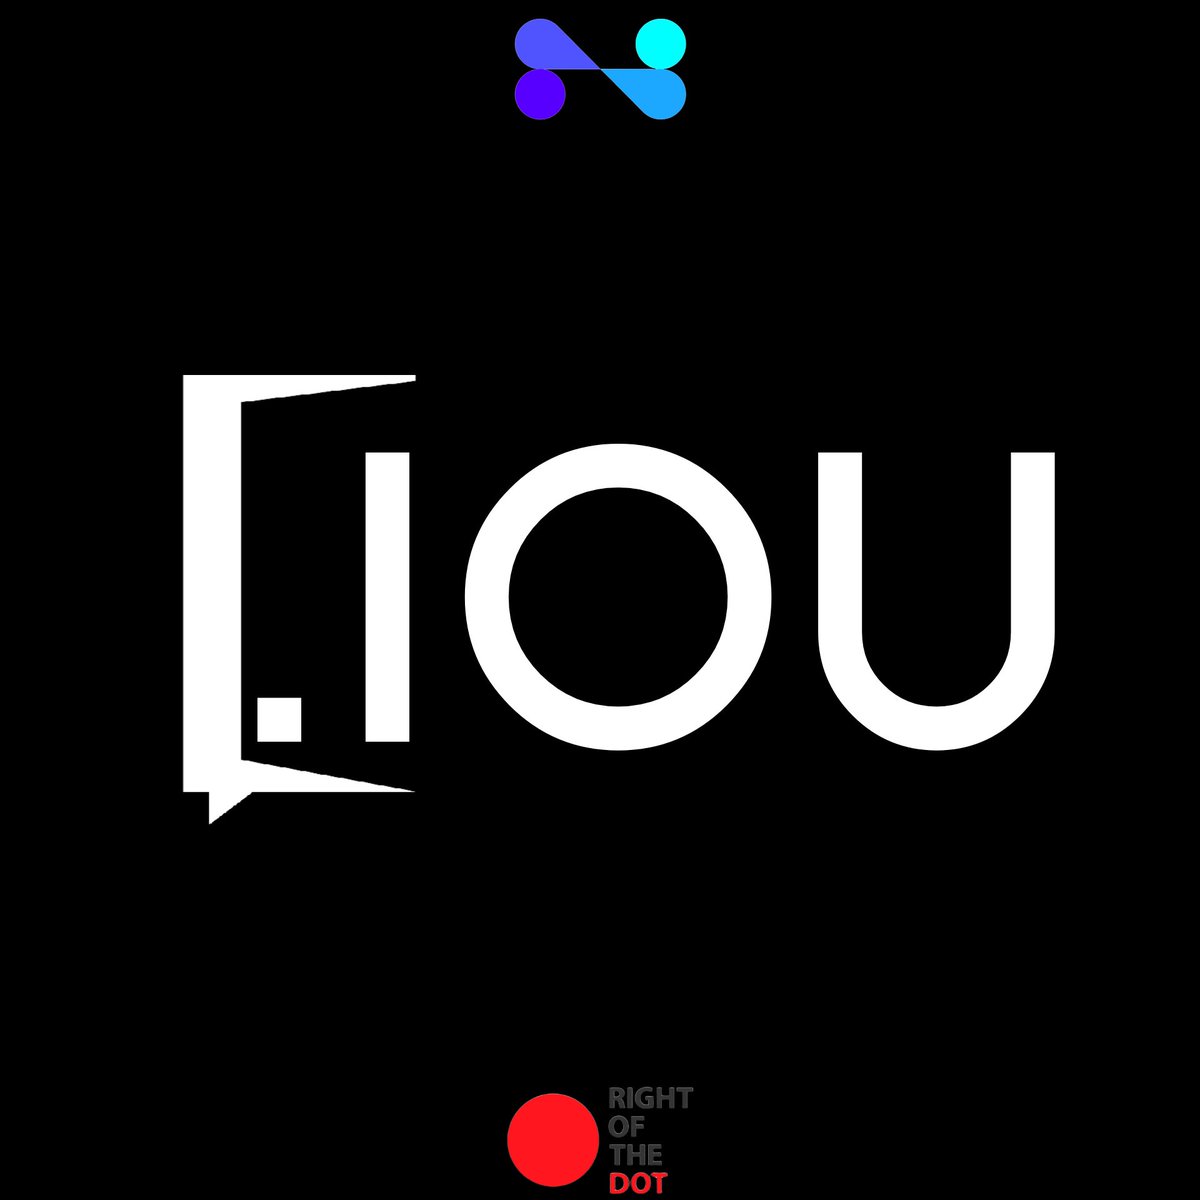 @MonteCahn I'm ecstatic. A web3 TLD from @freenameio 

.IOU 

Is up for auction through @RIGHToftheDOT. I appreciate the opportunity 🤝🫡